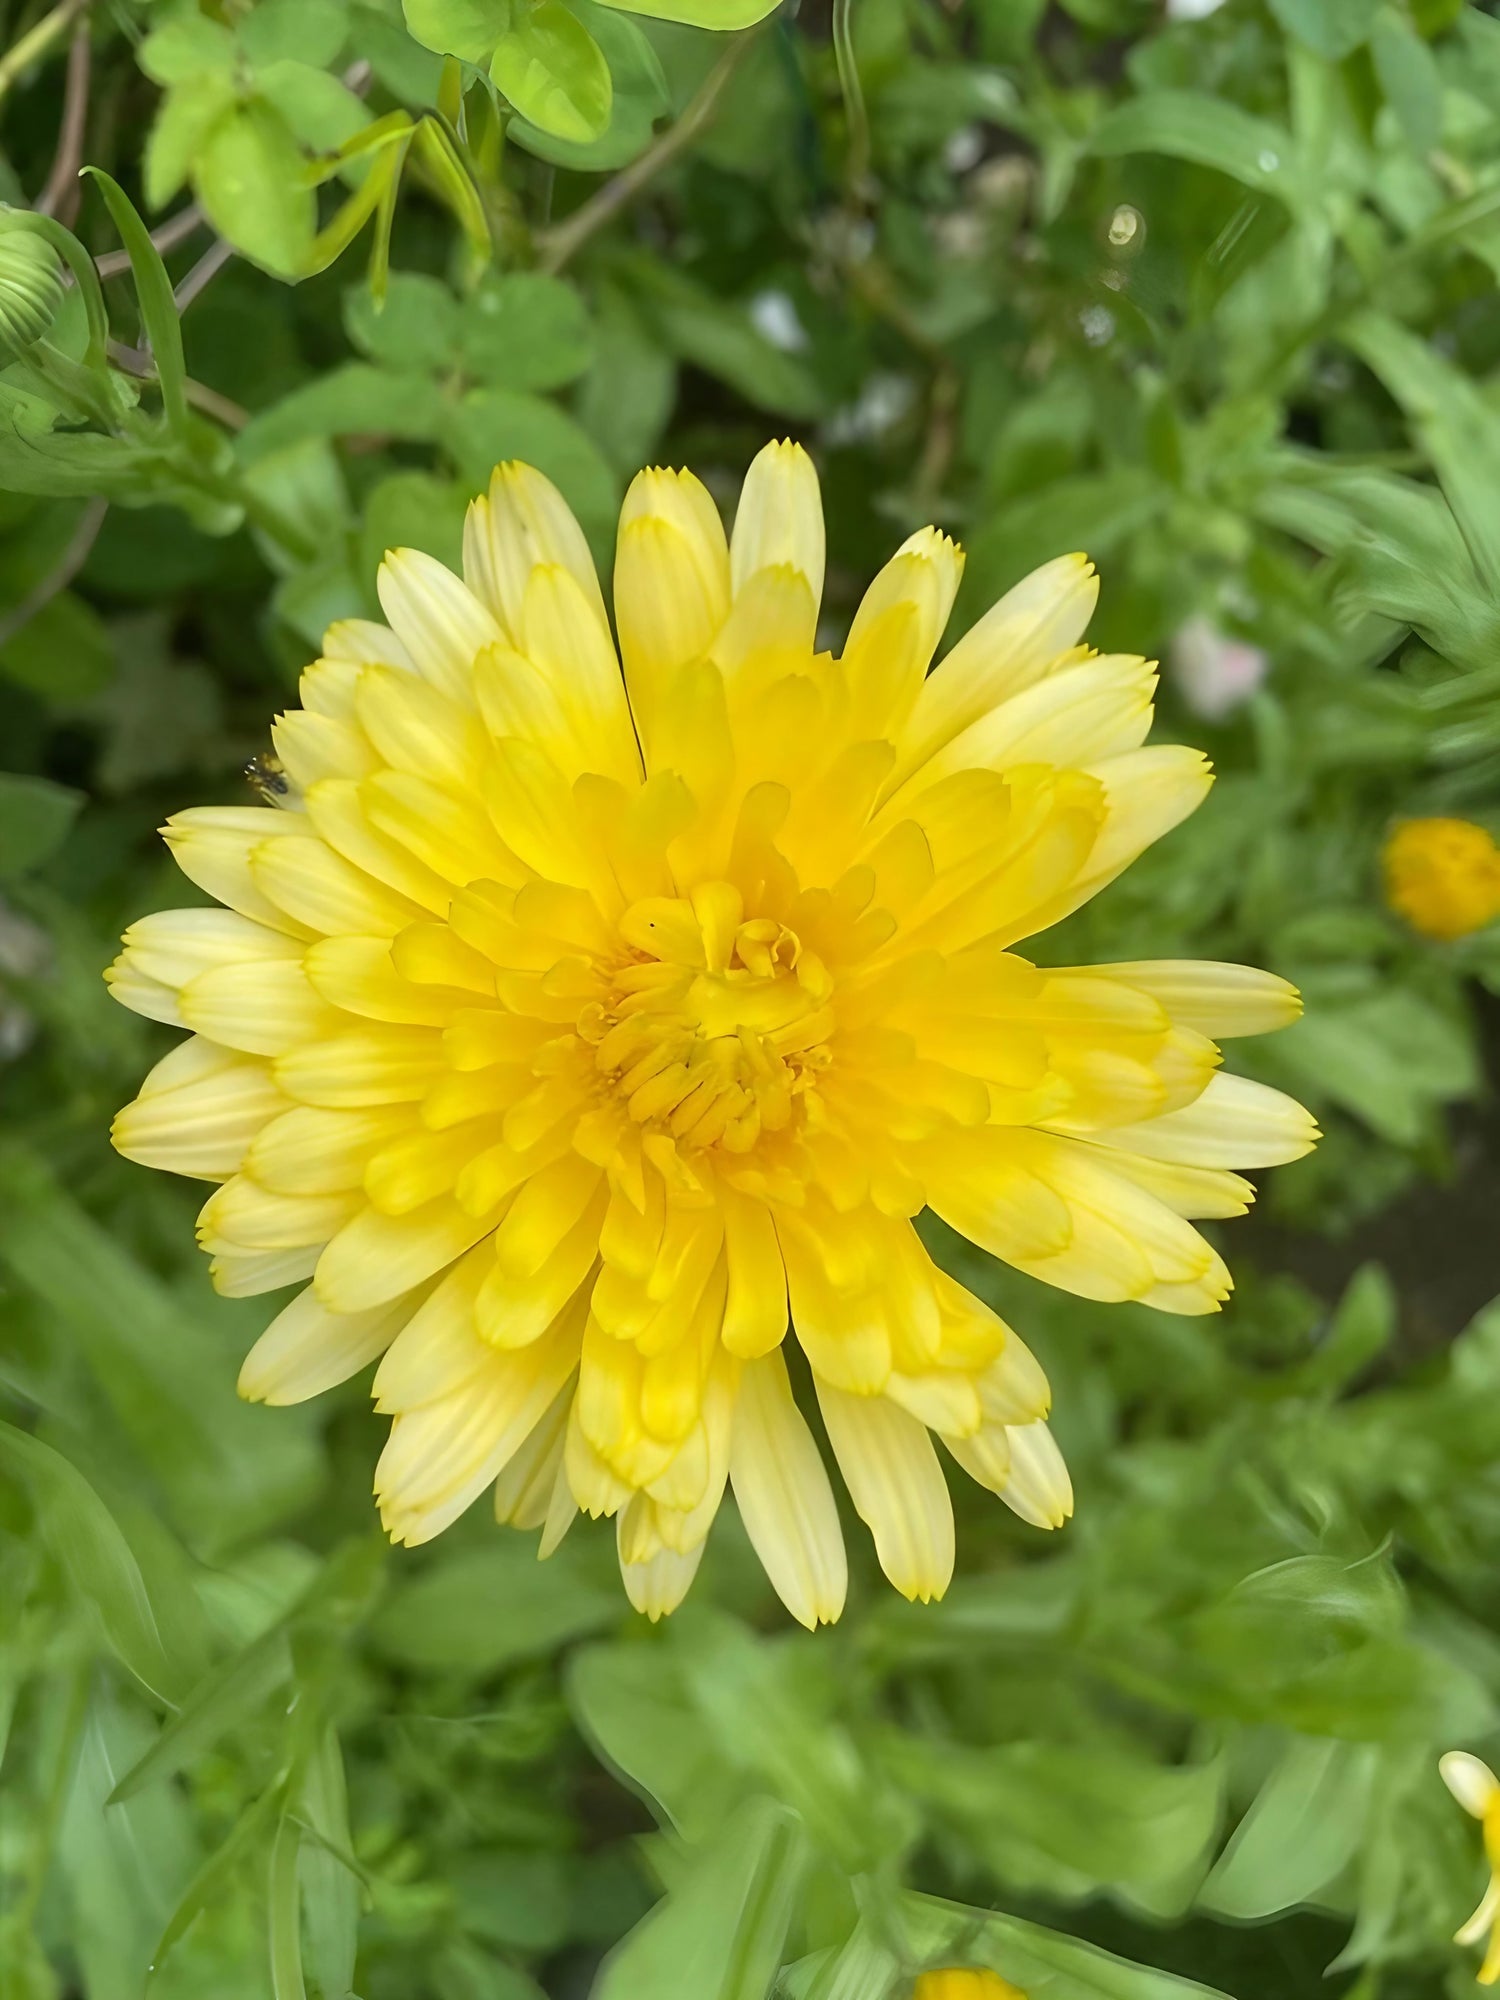 Single bloom of Calendula Pacific Beauty from the product line